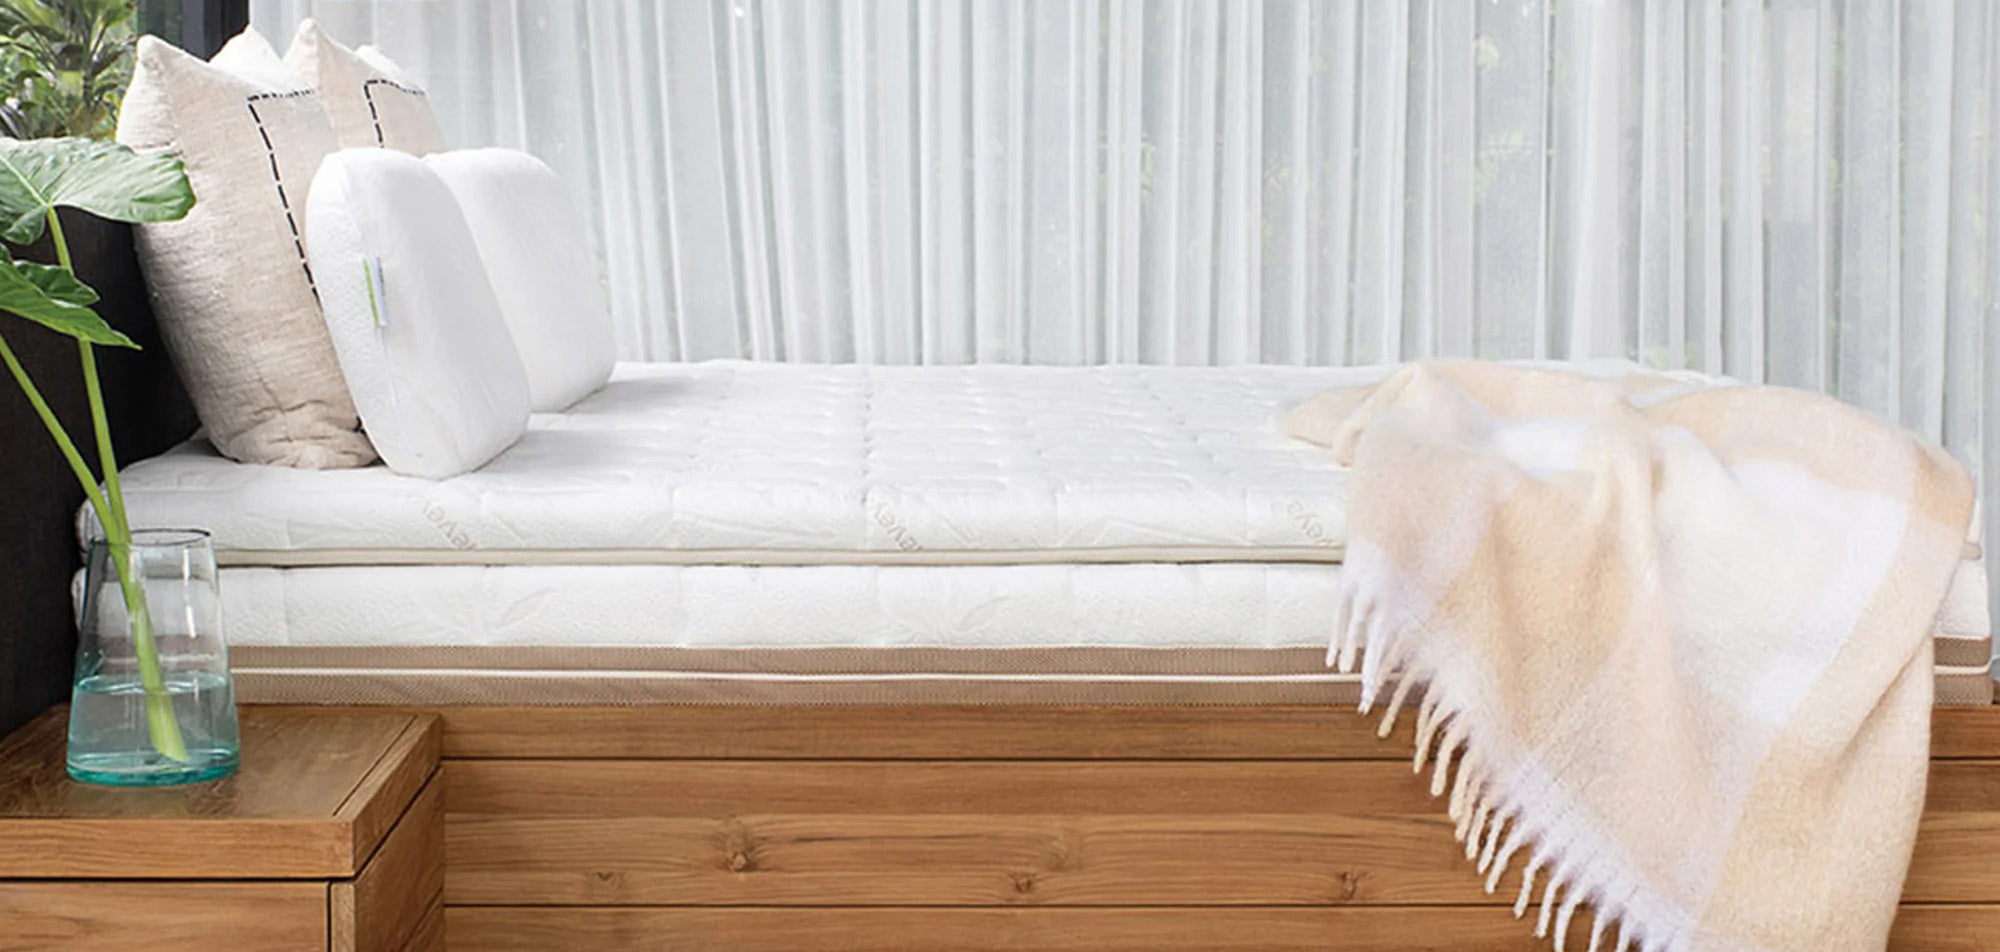 What Are the Benefits of Latex Mattress